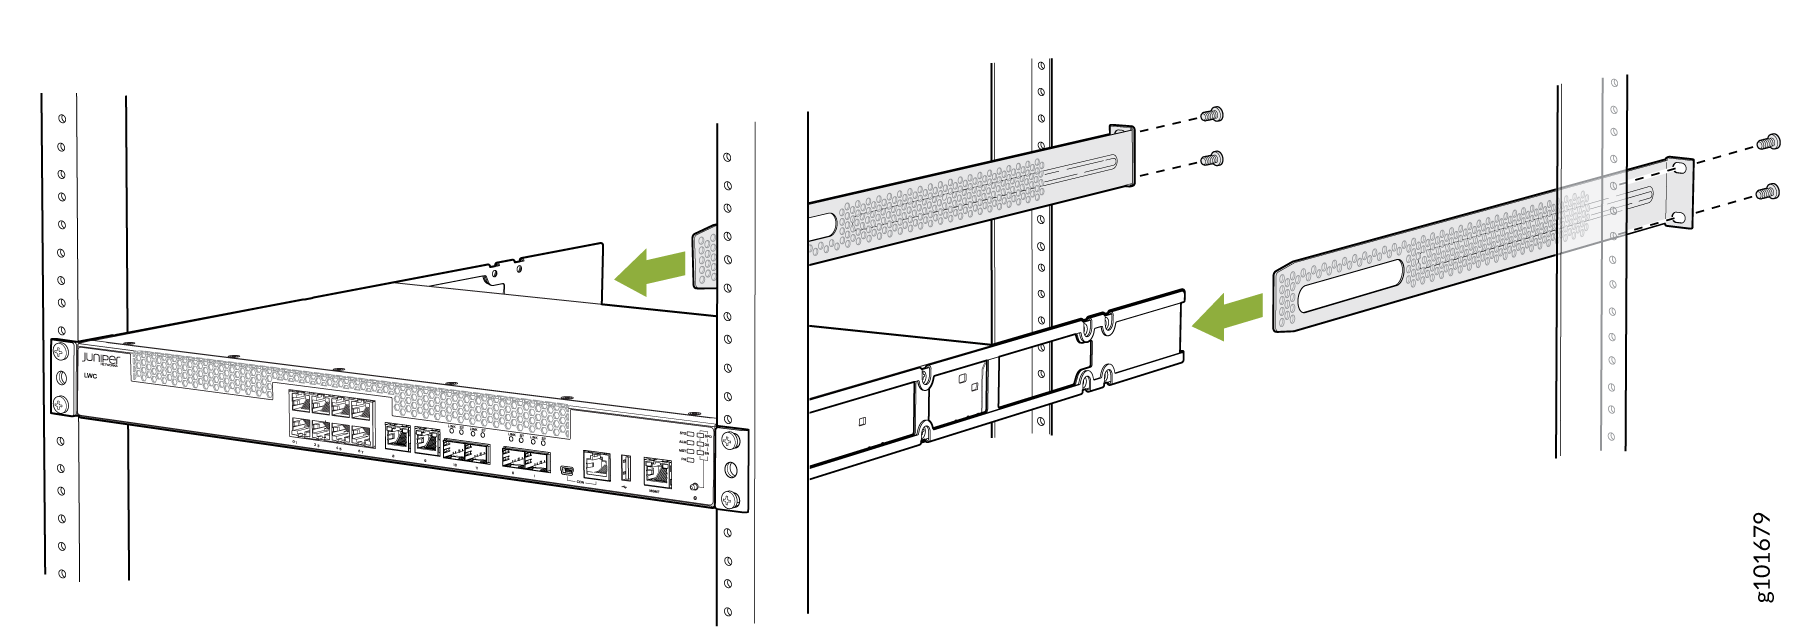 Mount the Device on the Front Posts in a Rack